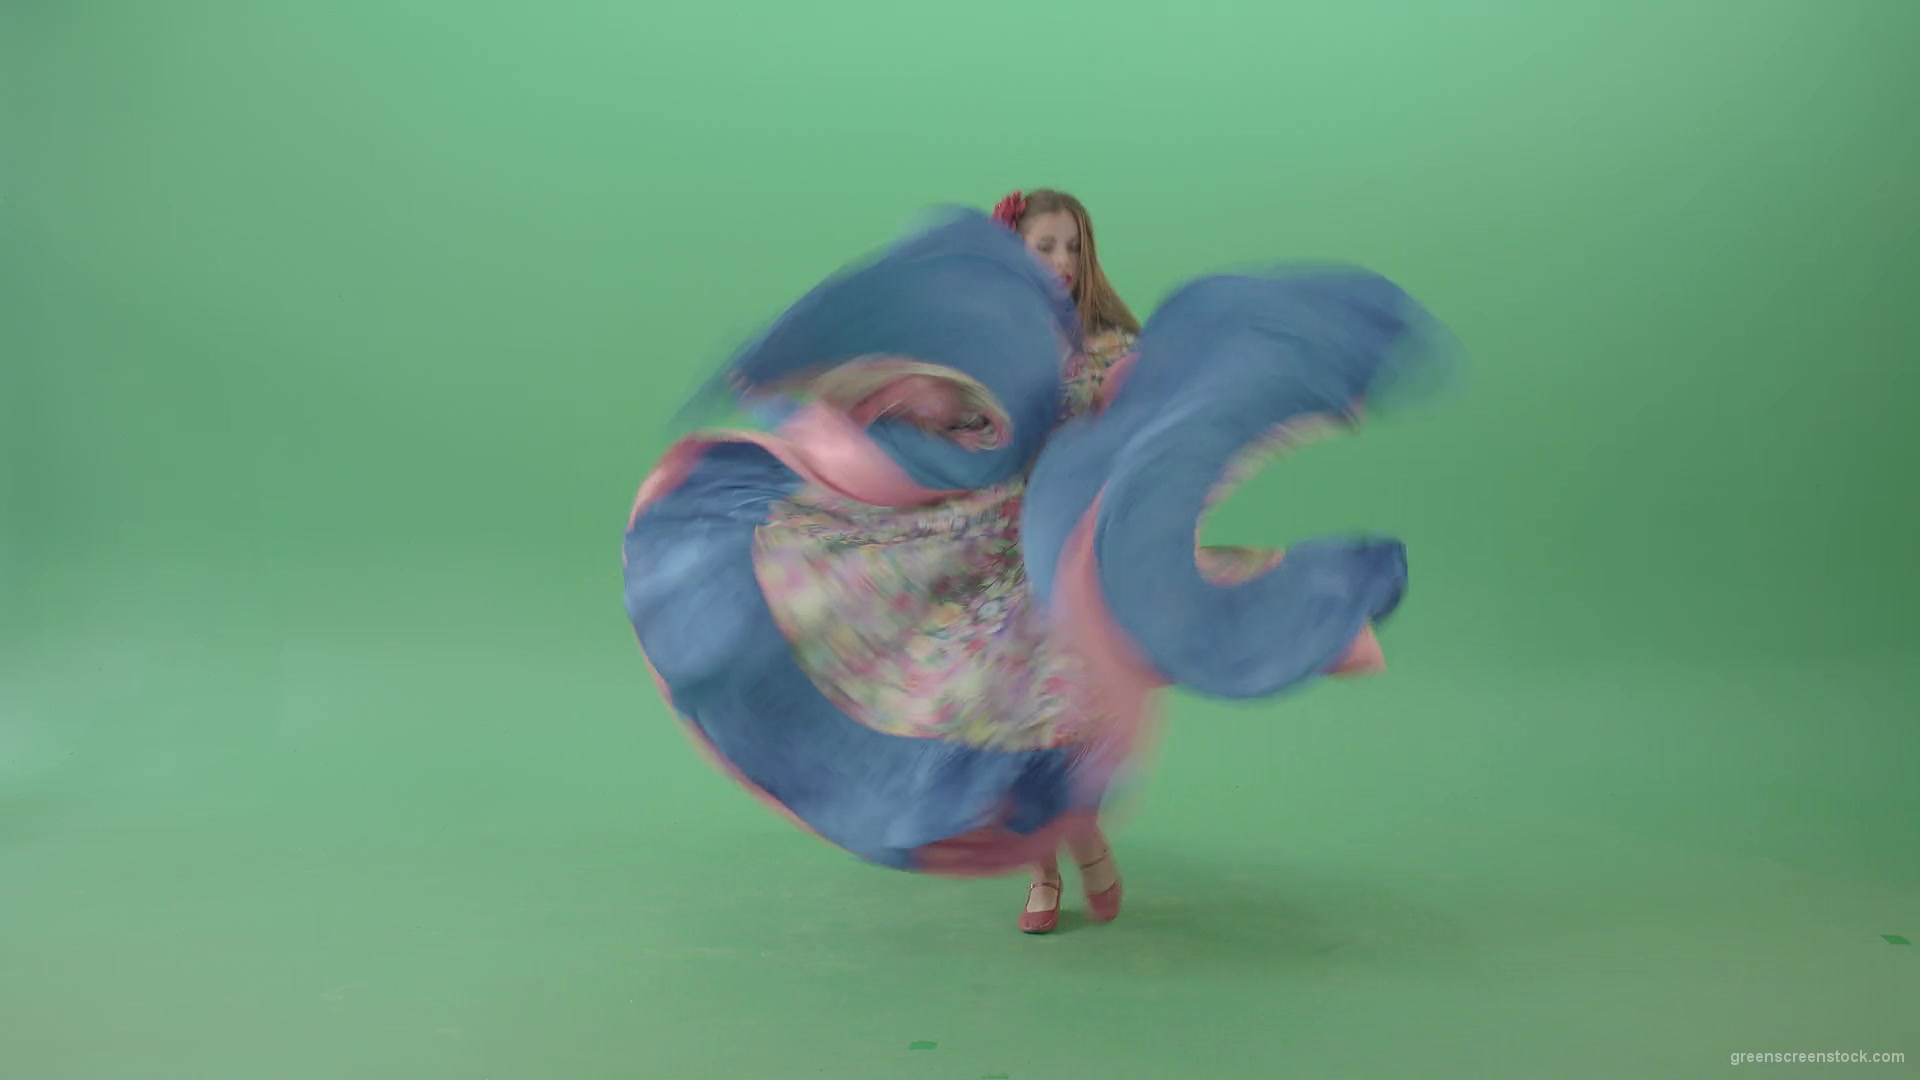 Roma-gipsy-woman-dancing-in-colorful-costume-isolated-on-Green-Screen-4K-Video-Footage-1920_009 Green Screen Stock